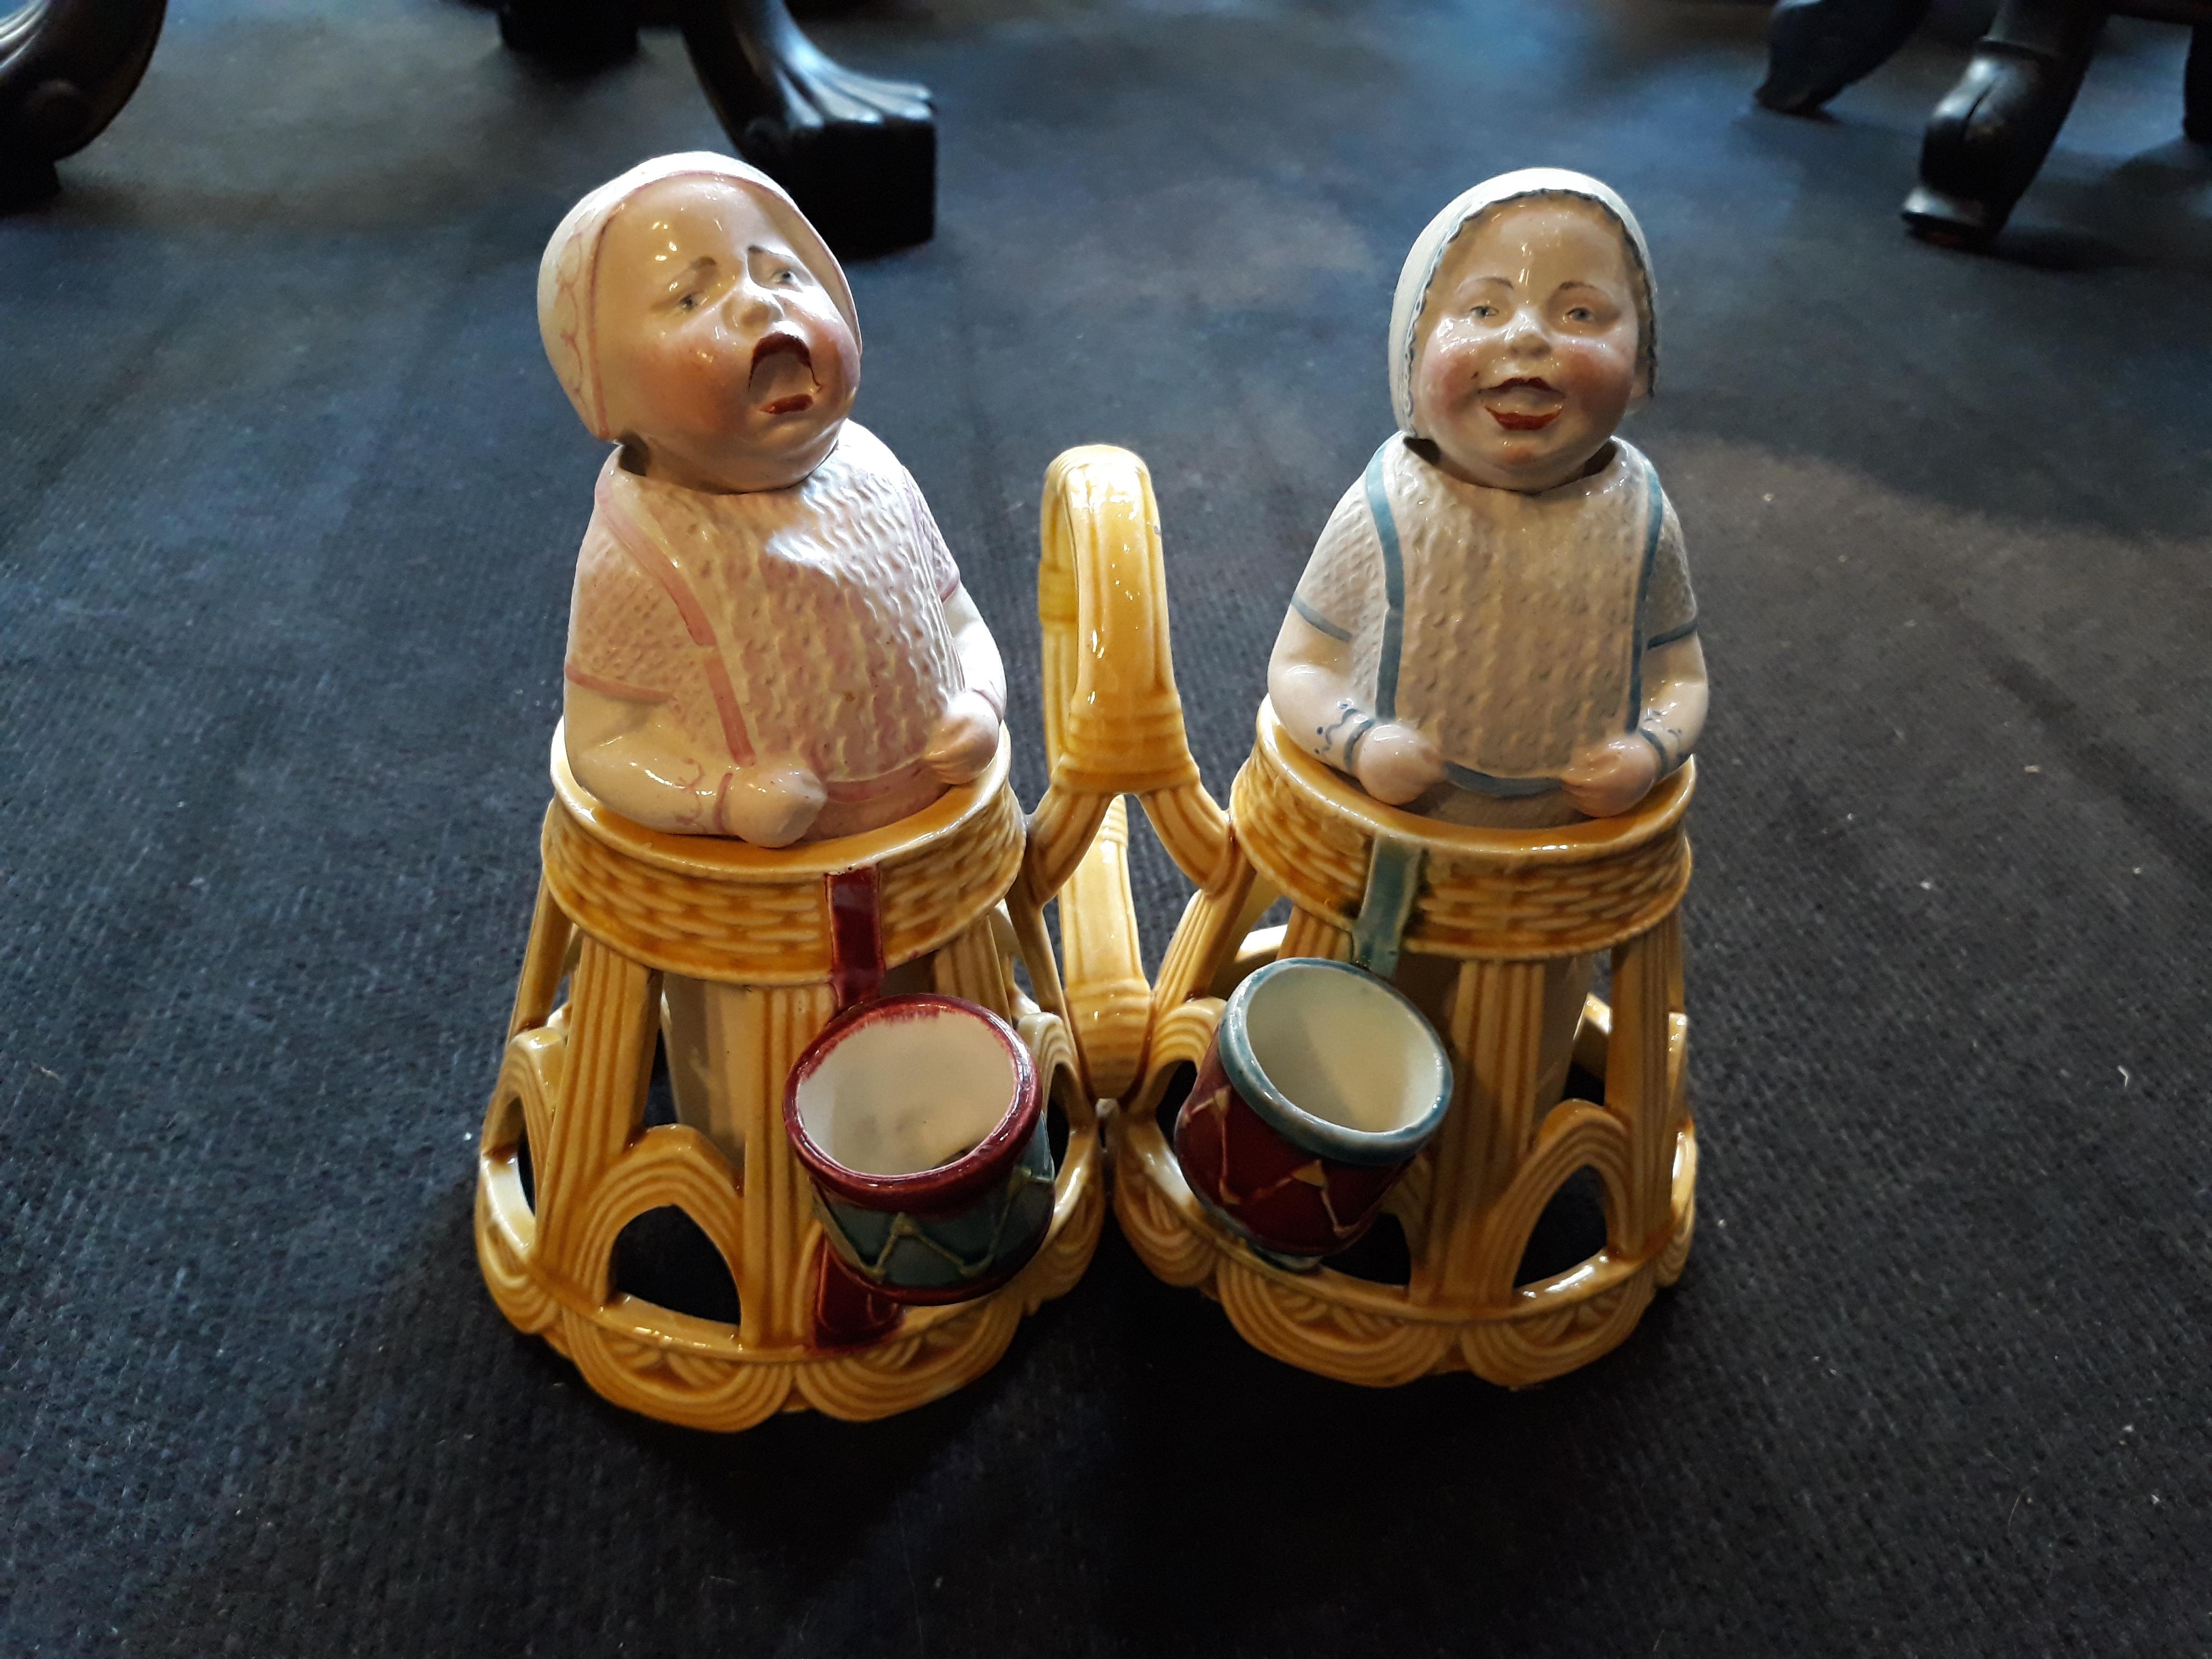 19th Century Oil and Vinegar Shakers by George Dreyfus For Sale 1